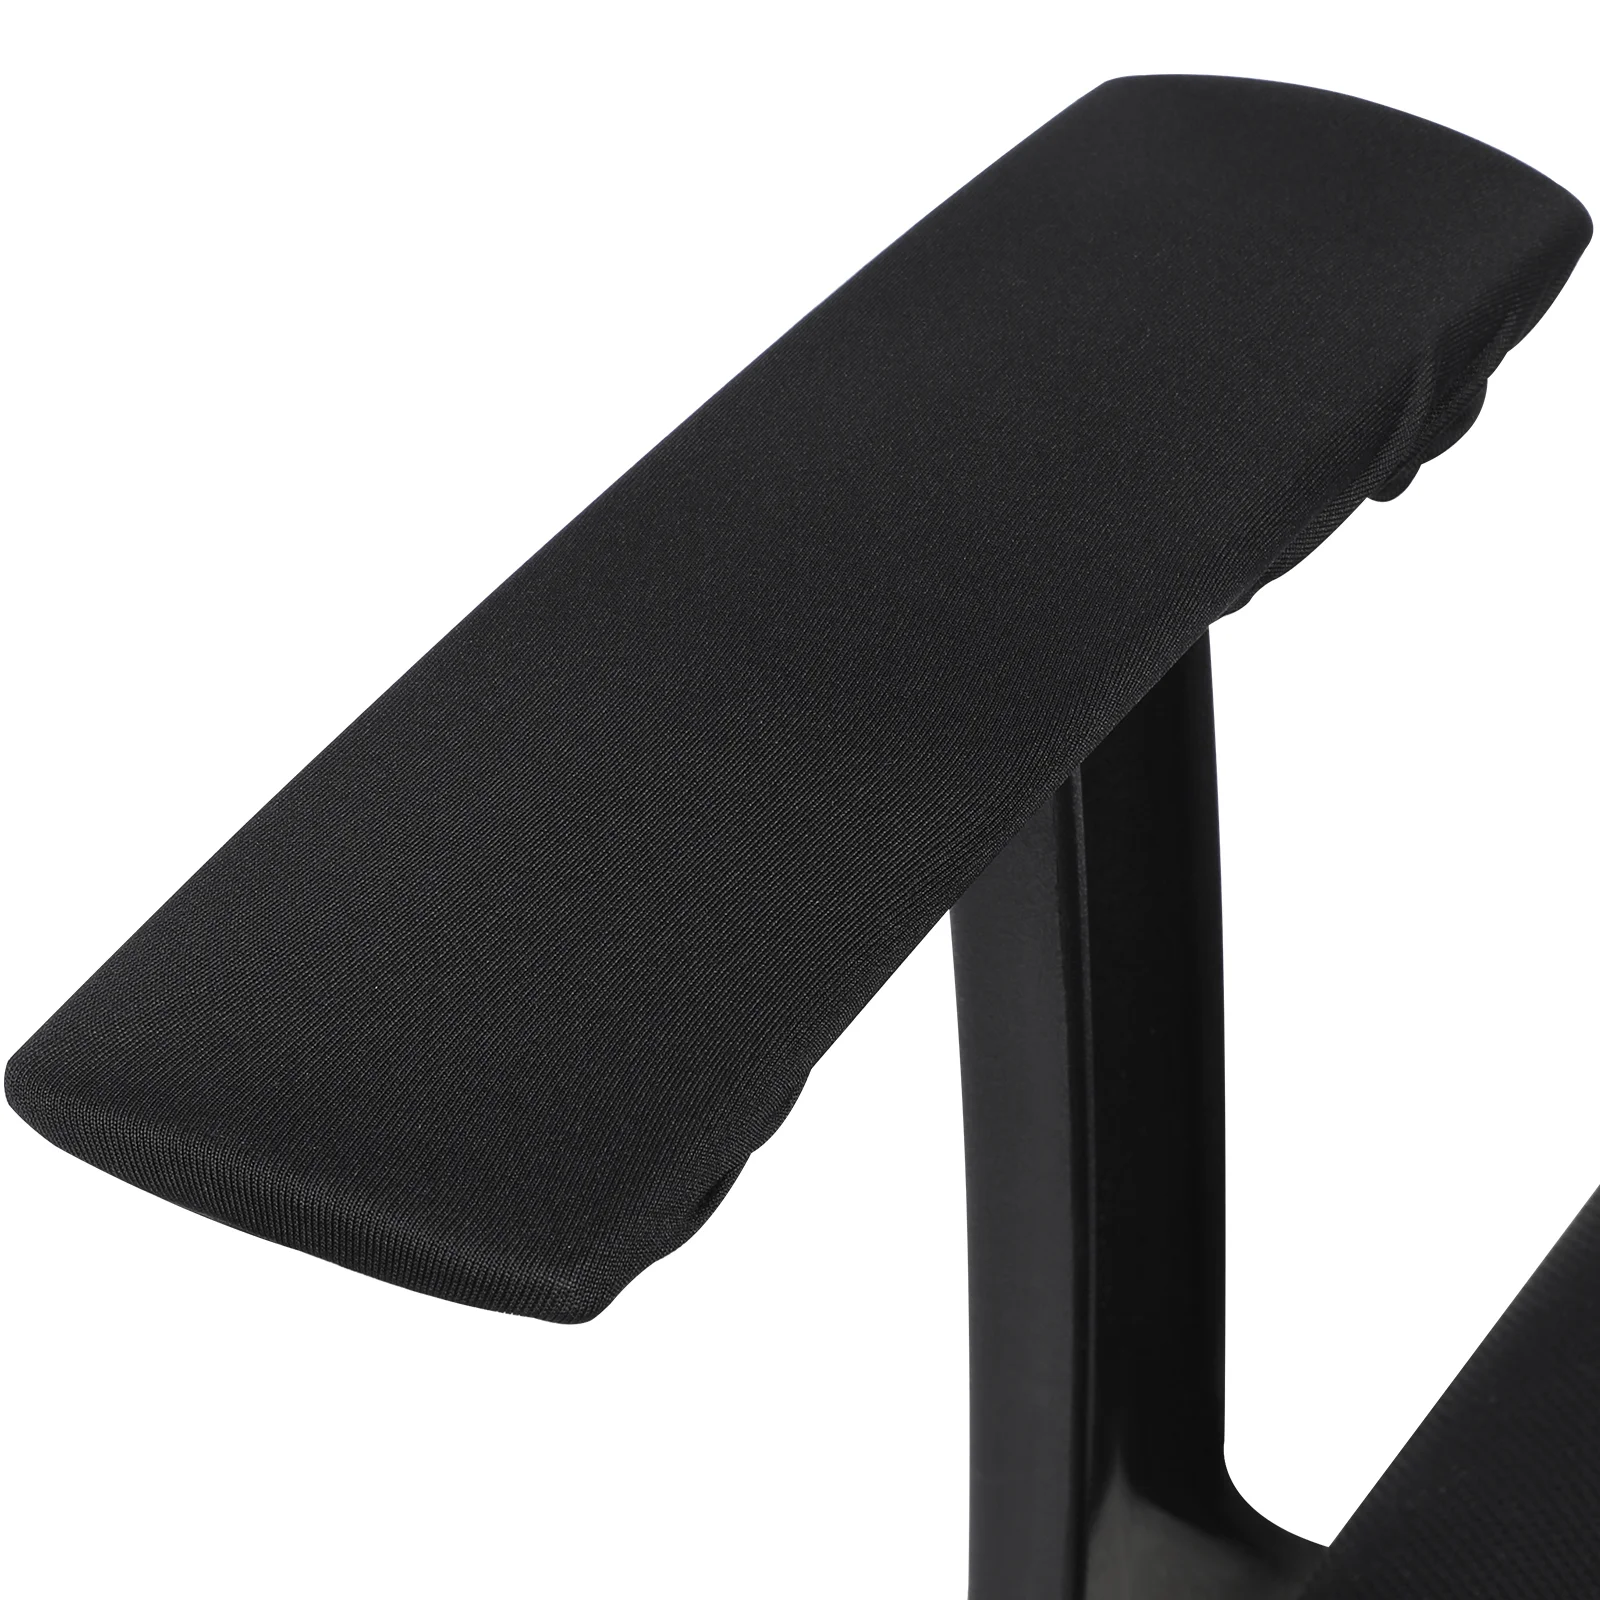 

2 Pcs Stretch Fabric Armrest Cover Office Chair Slipcovers Arm Covers Chairs Gloves Arm Rest Covering Armrest Slipcover